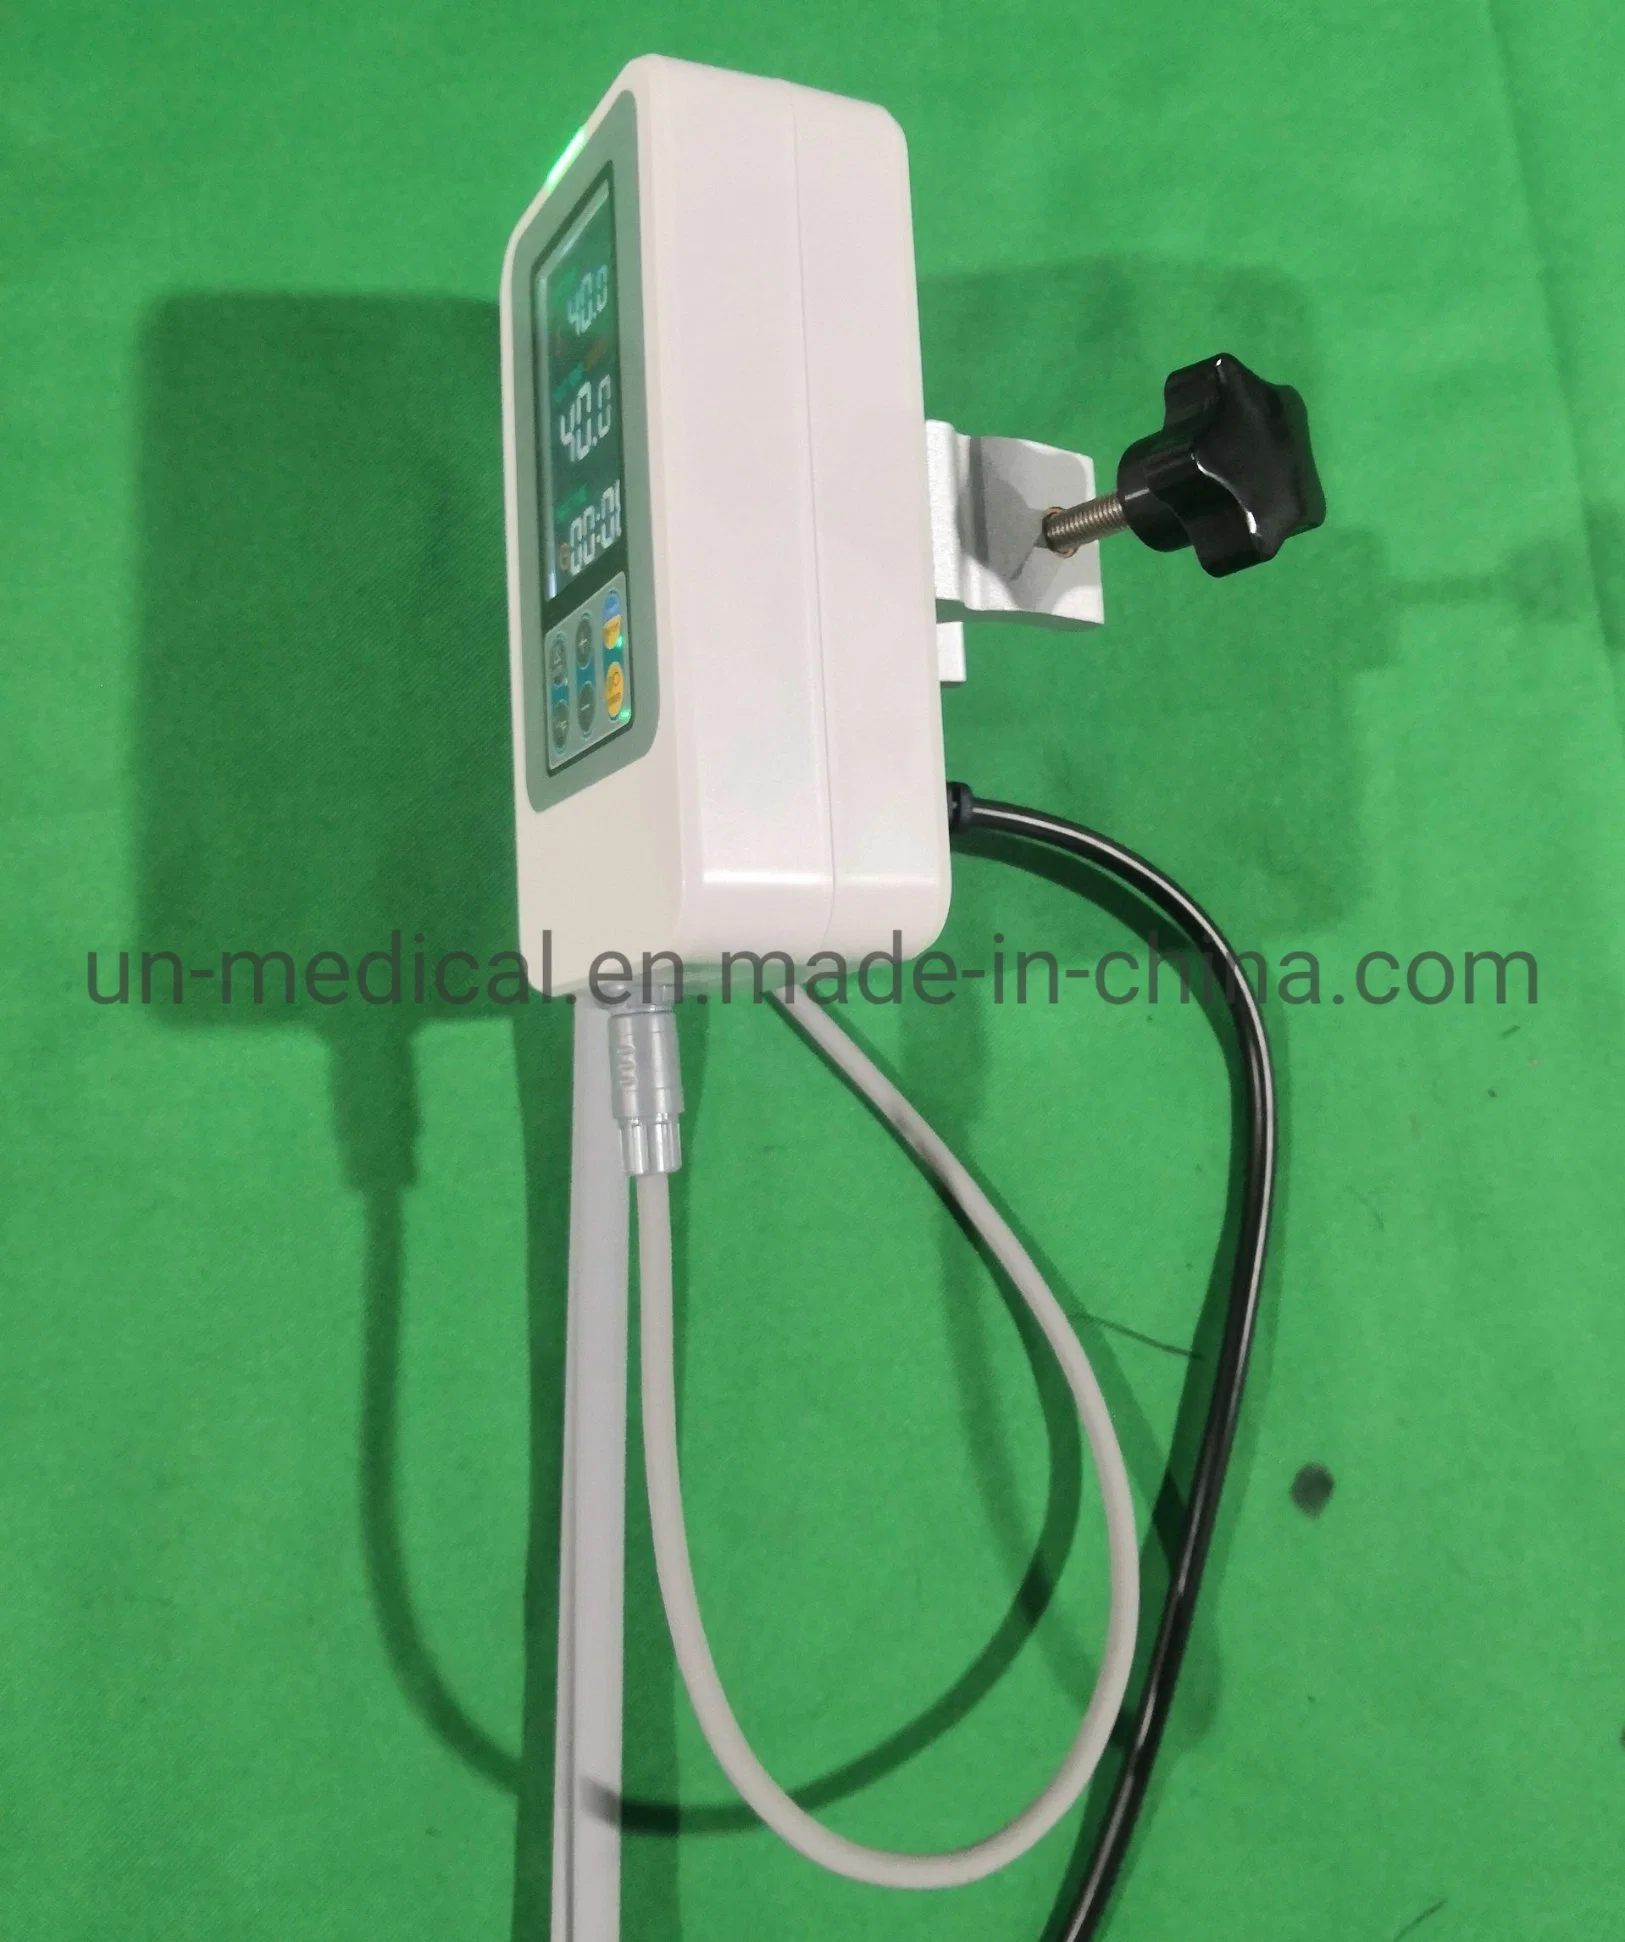 Portable Medical Blood Infusion Fluid Infusion Warmer Infusion Heater